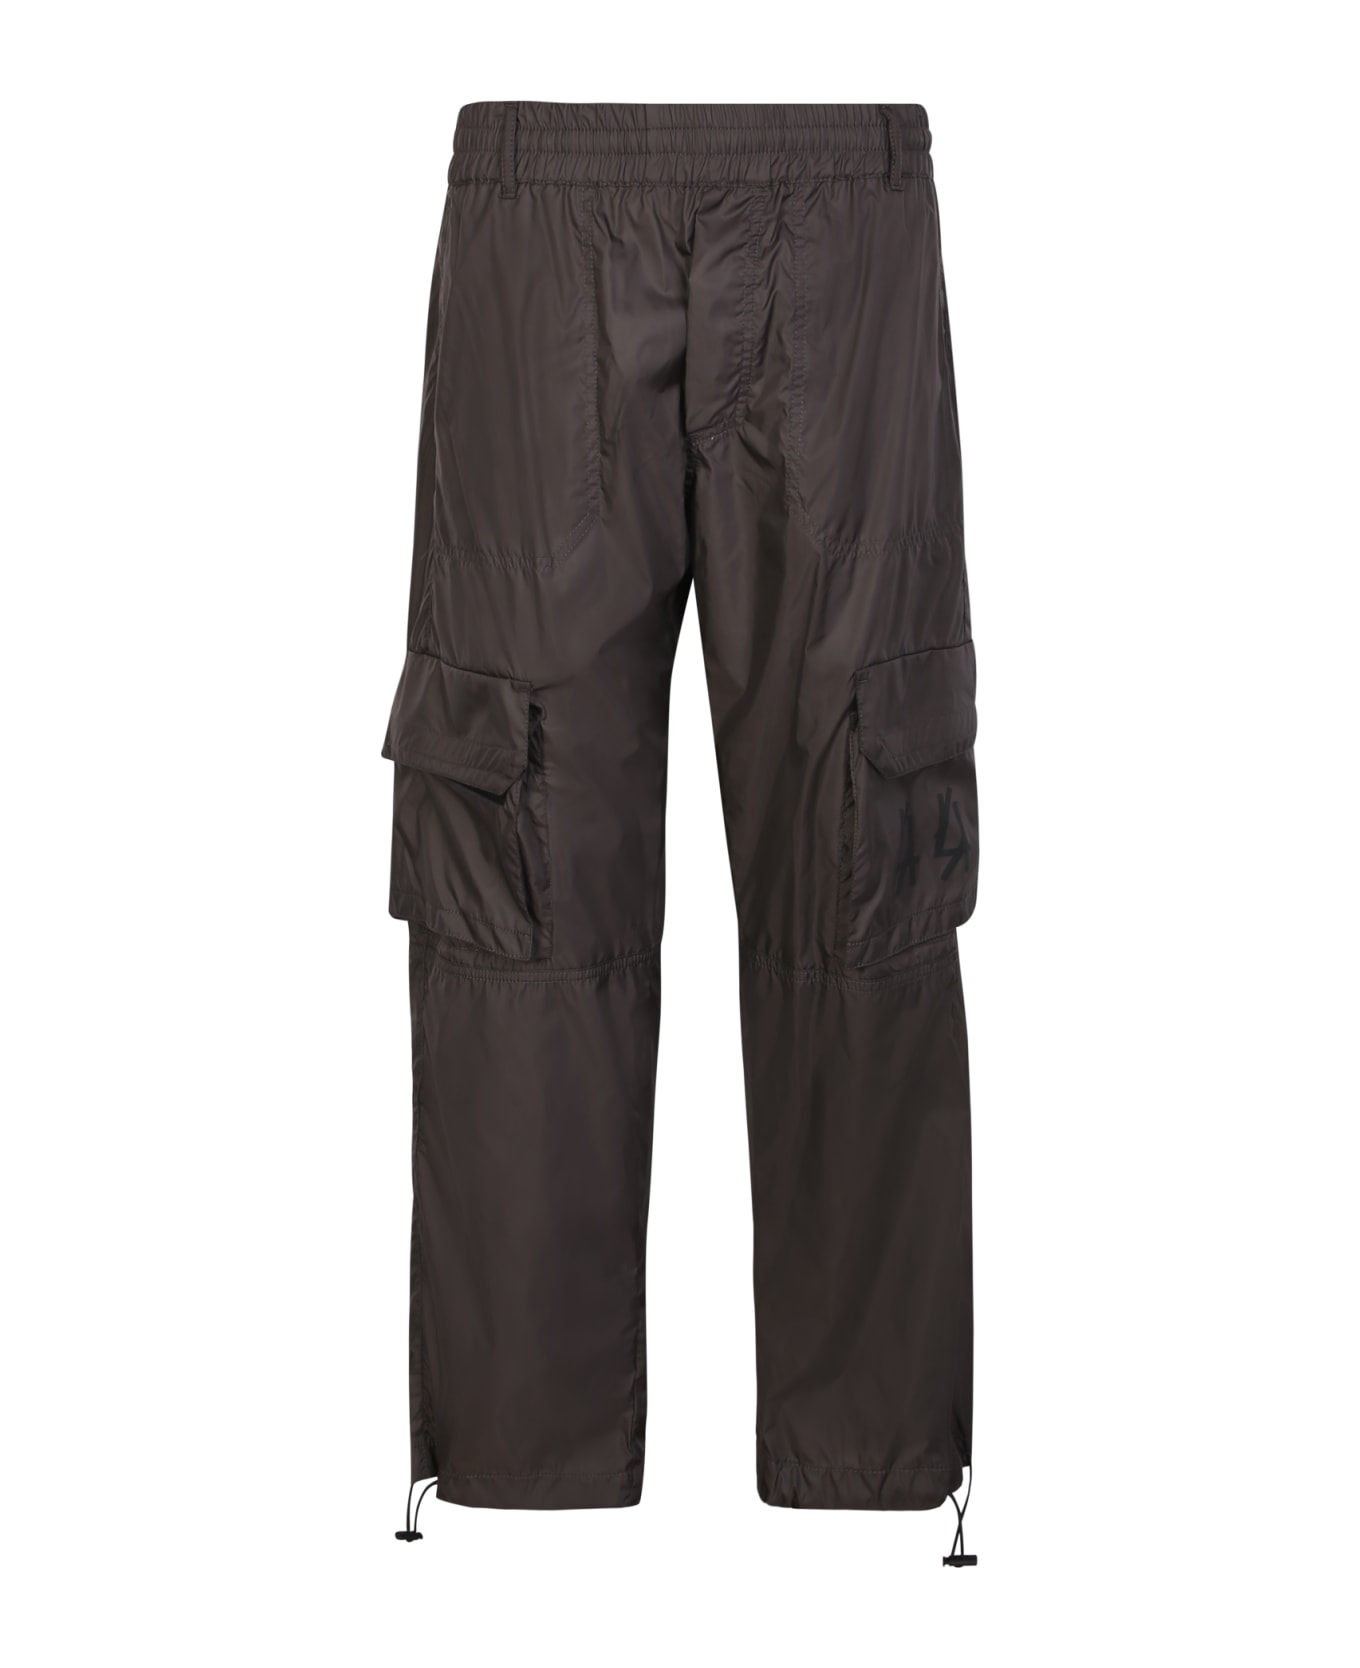 44 Label Group Cargo Trousers - Brown